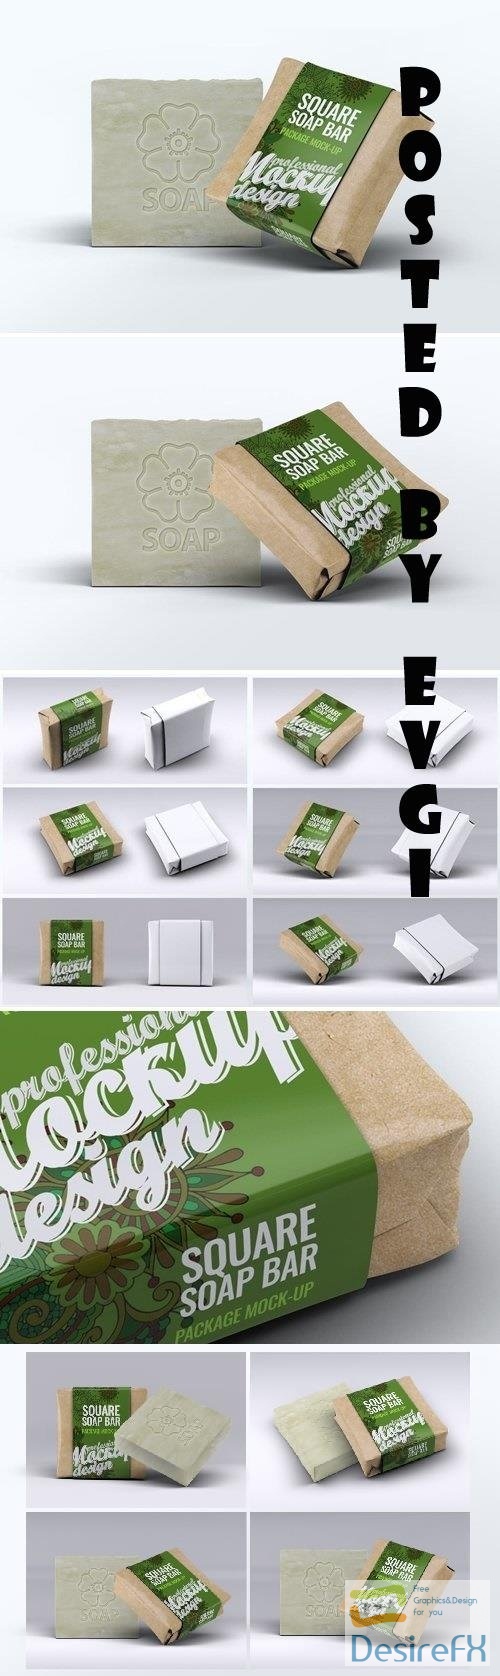 Square Soap Bar Package Mock-up